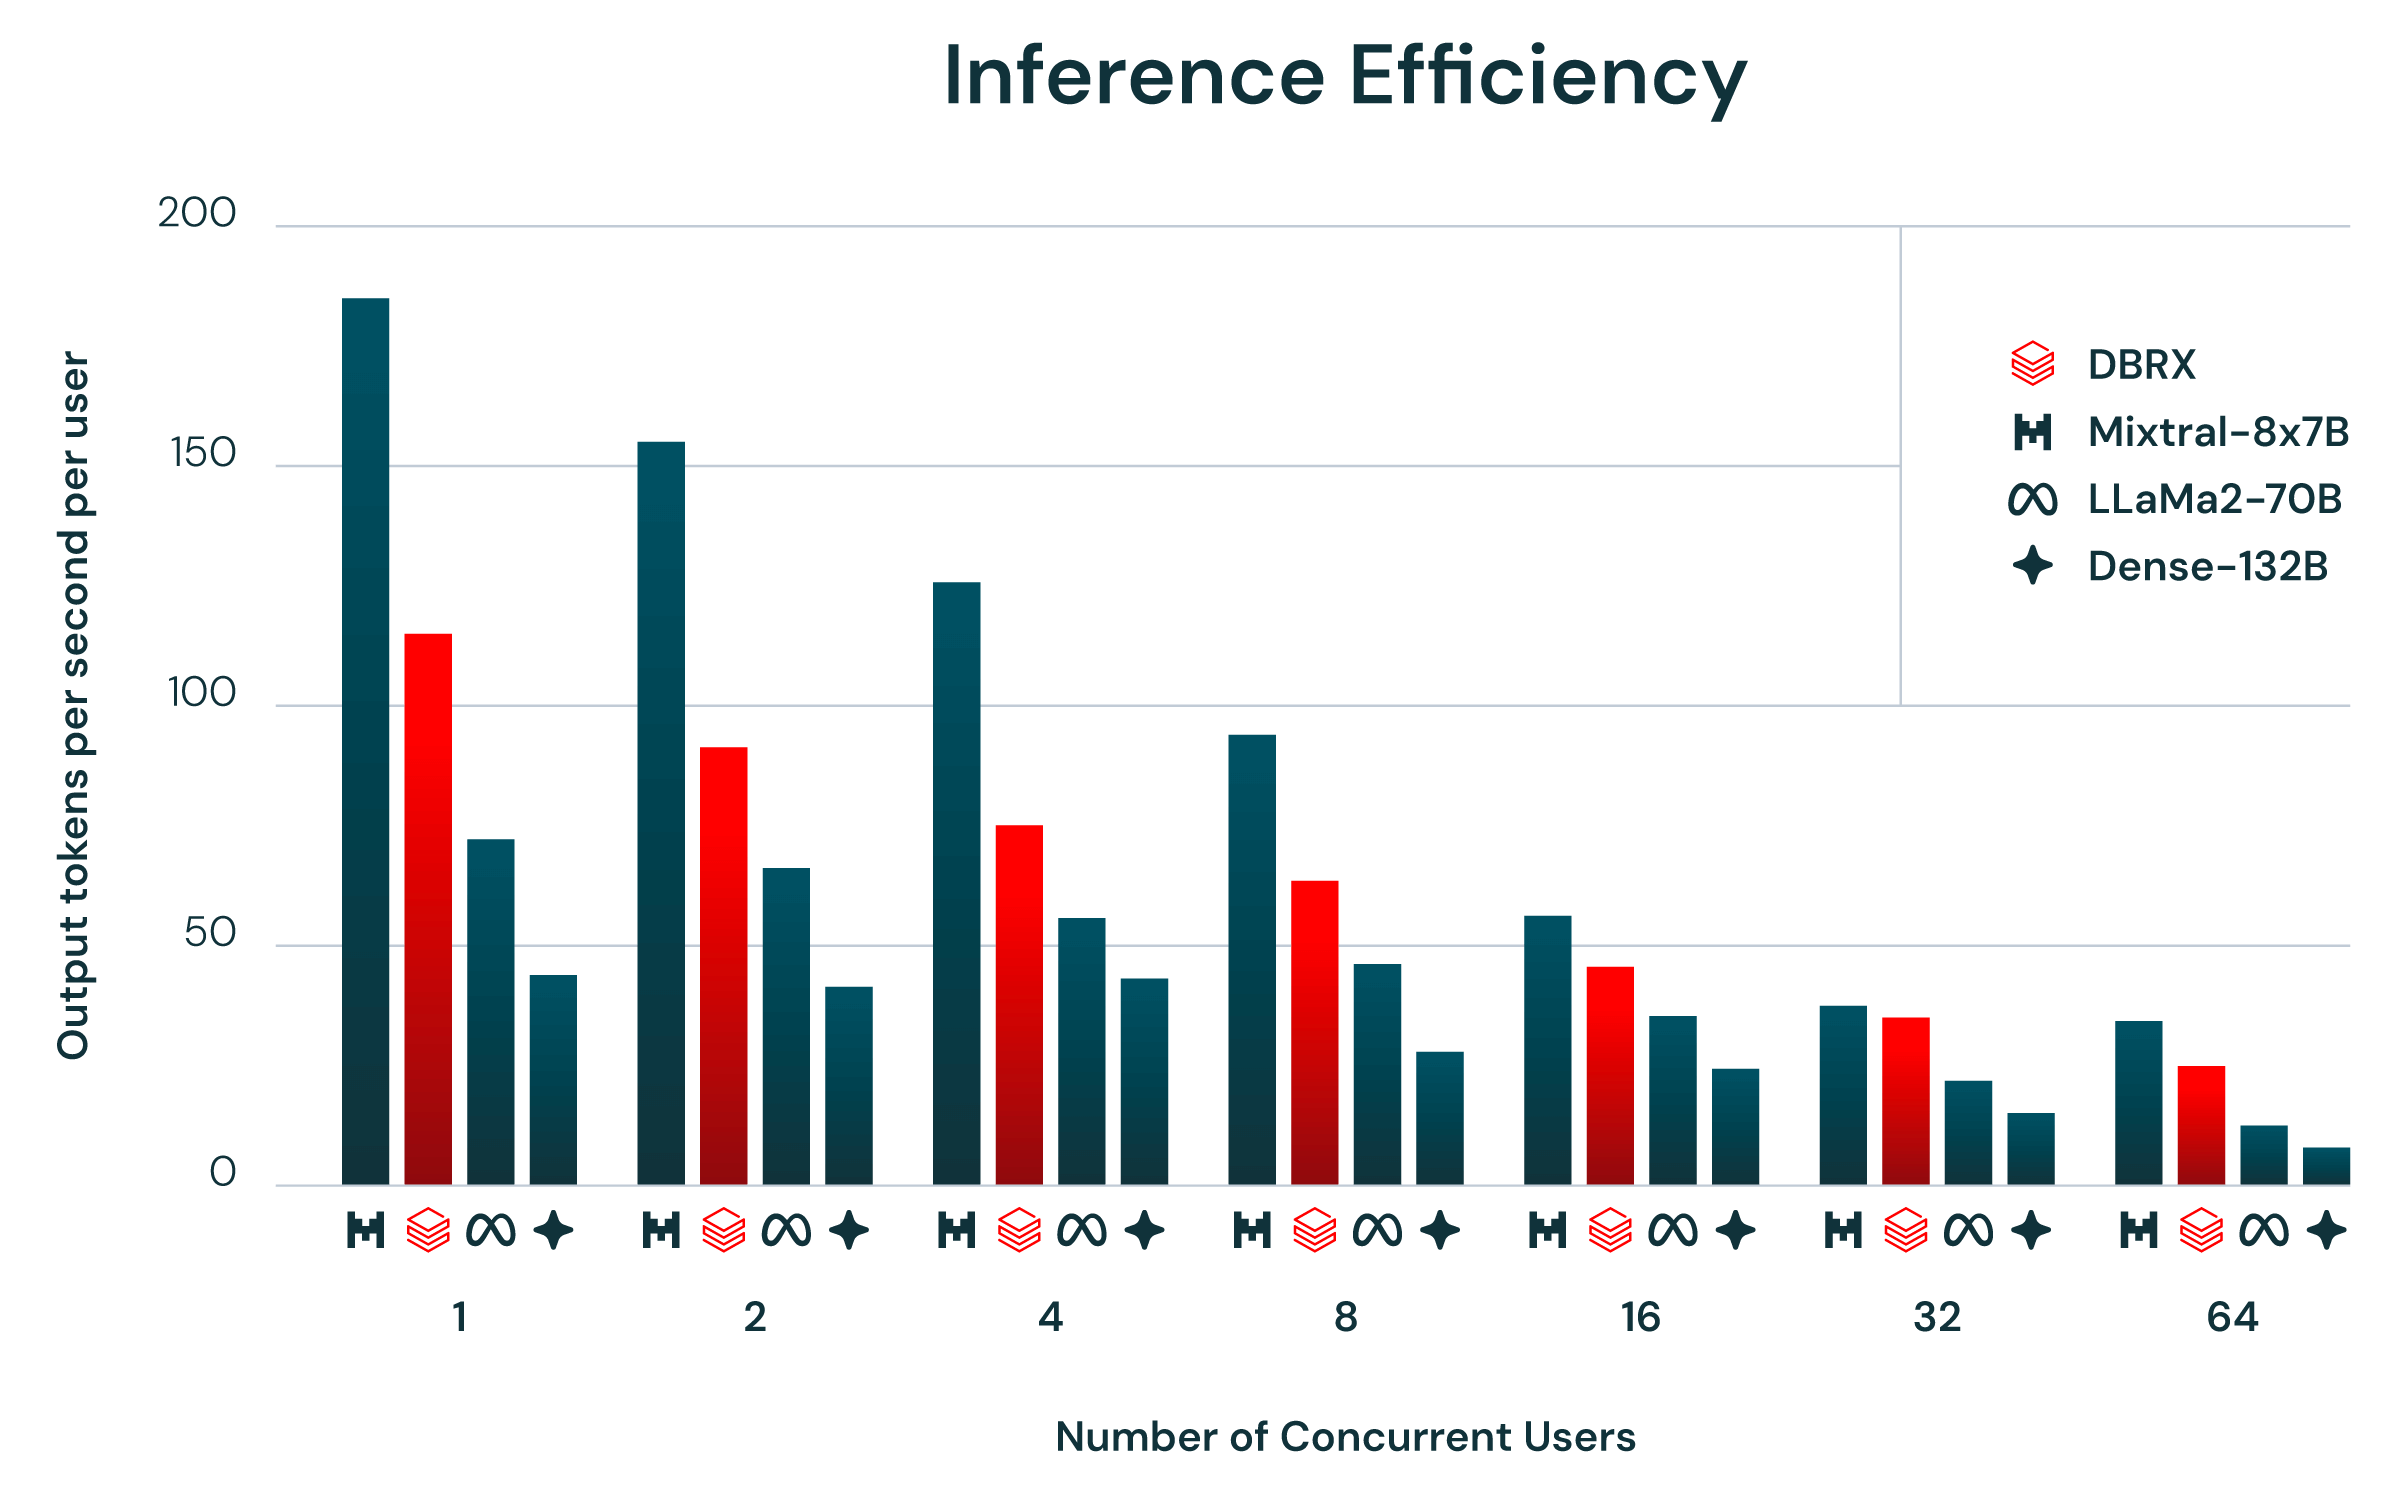 dbrx inference efficiency 